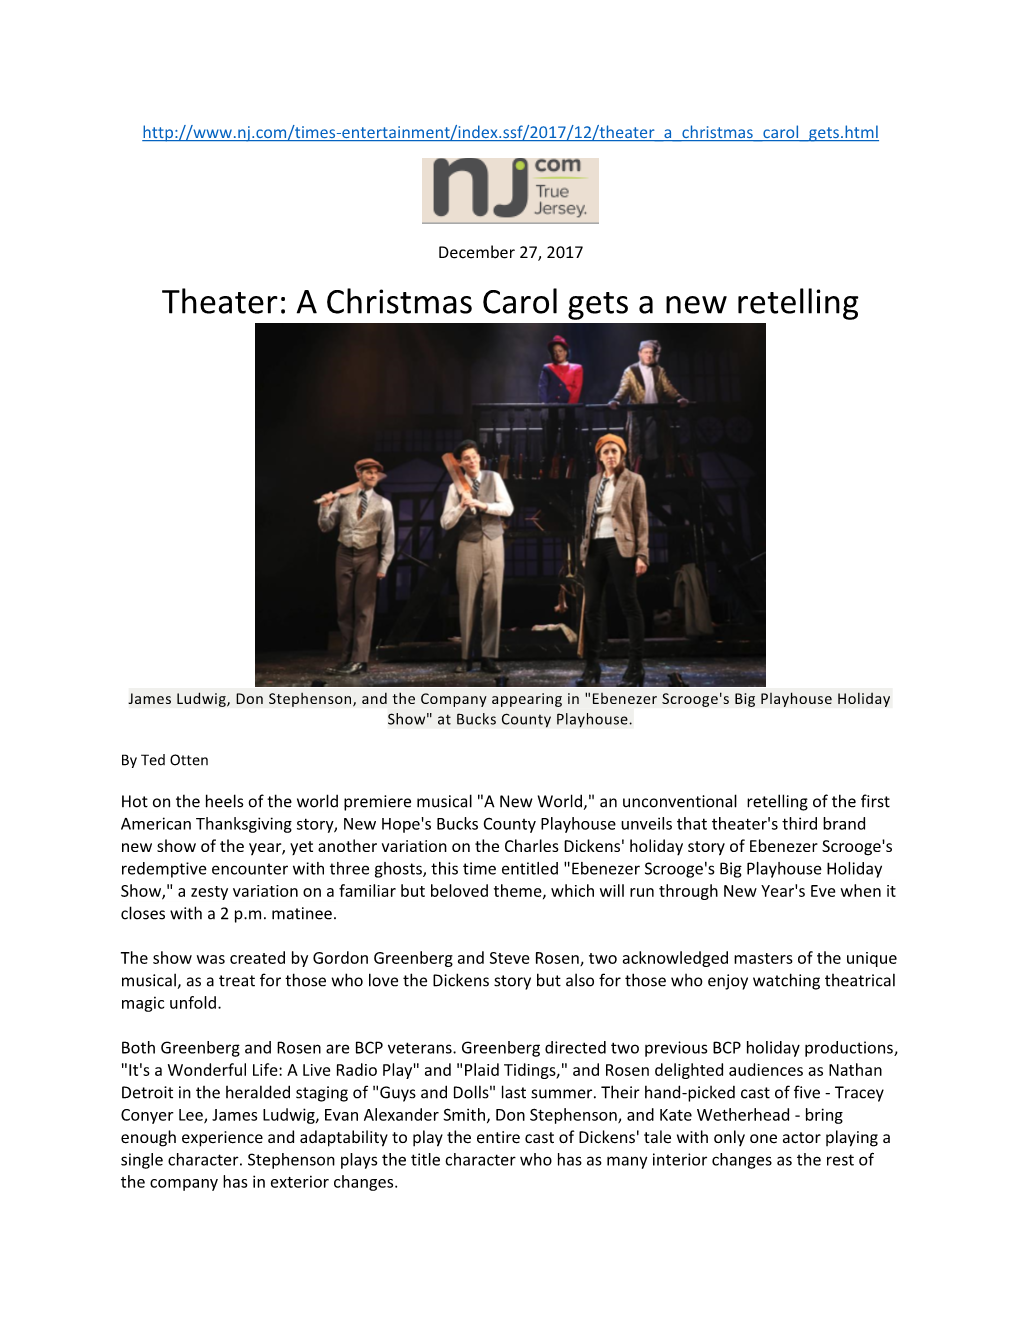 Theater: a Christmas Carol Gets a New Retelling